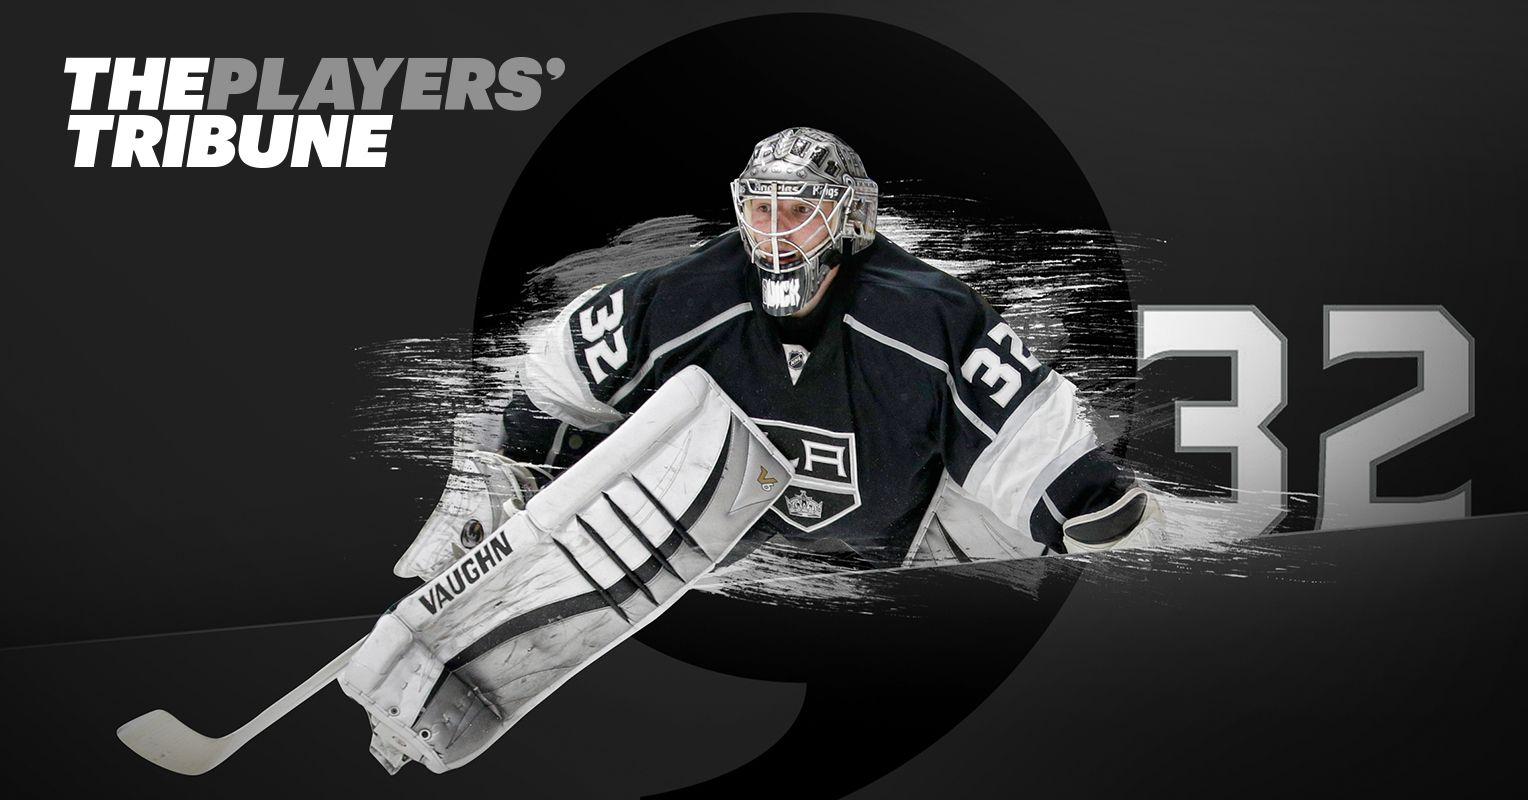 Elite Snipers 101: Part 2. By Jonathan Quick